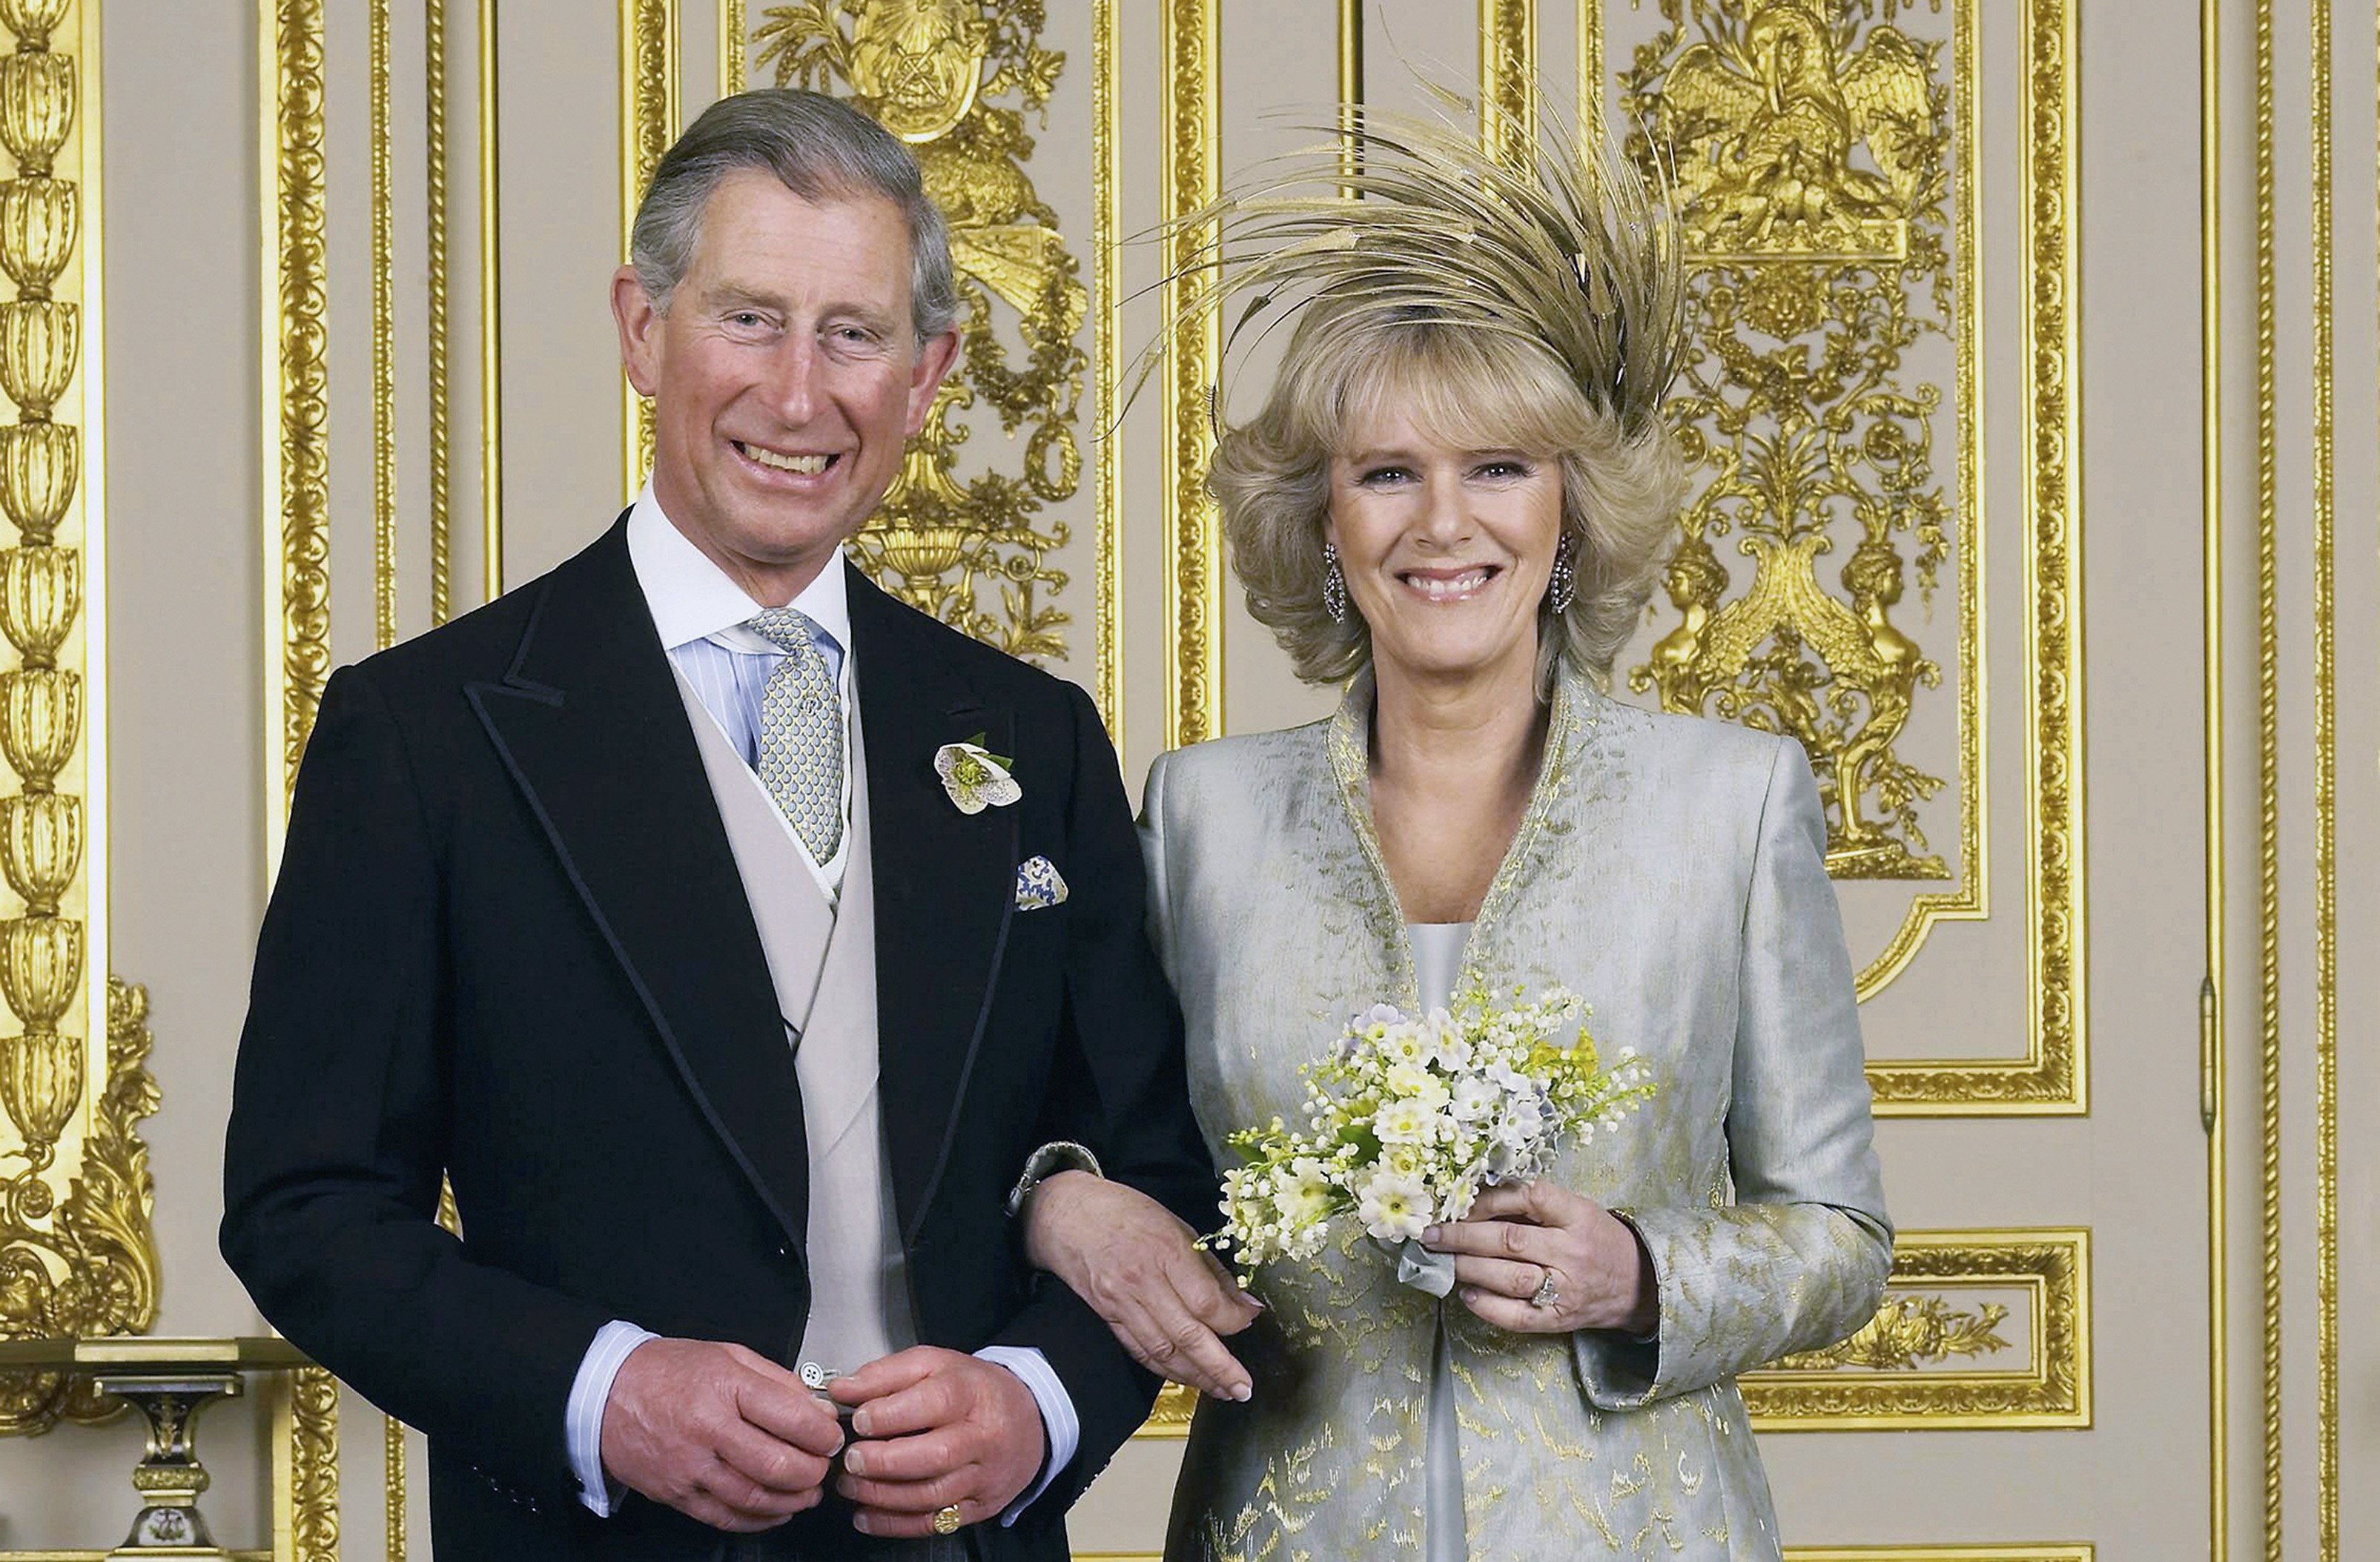 King Charles lll and Queen Consort, Camilla after their wedding ceremony, April 9, 2005 in Windsor, England. | Source: Getty Images